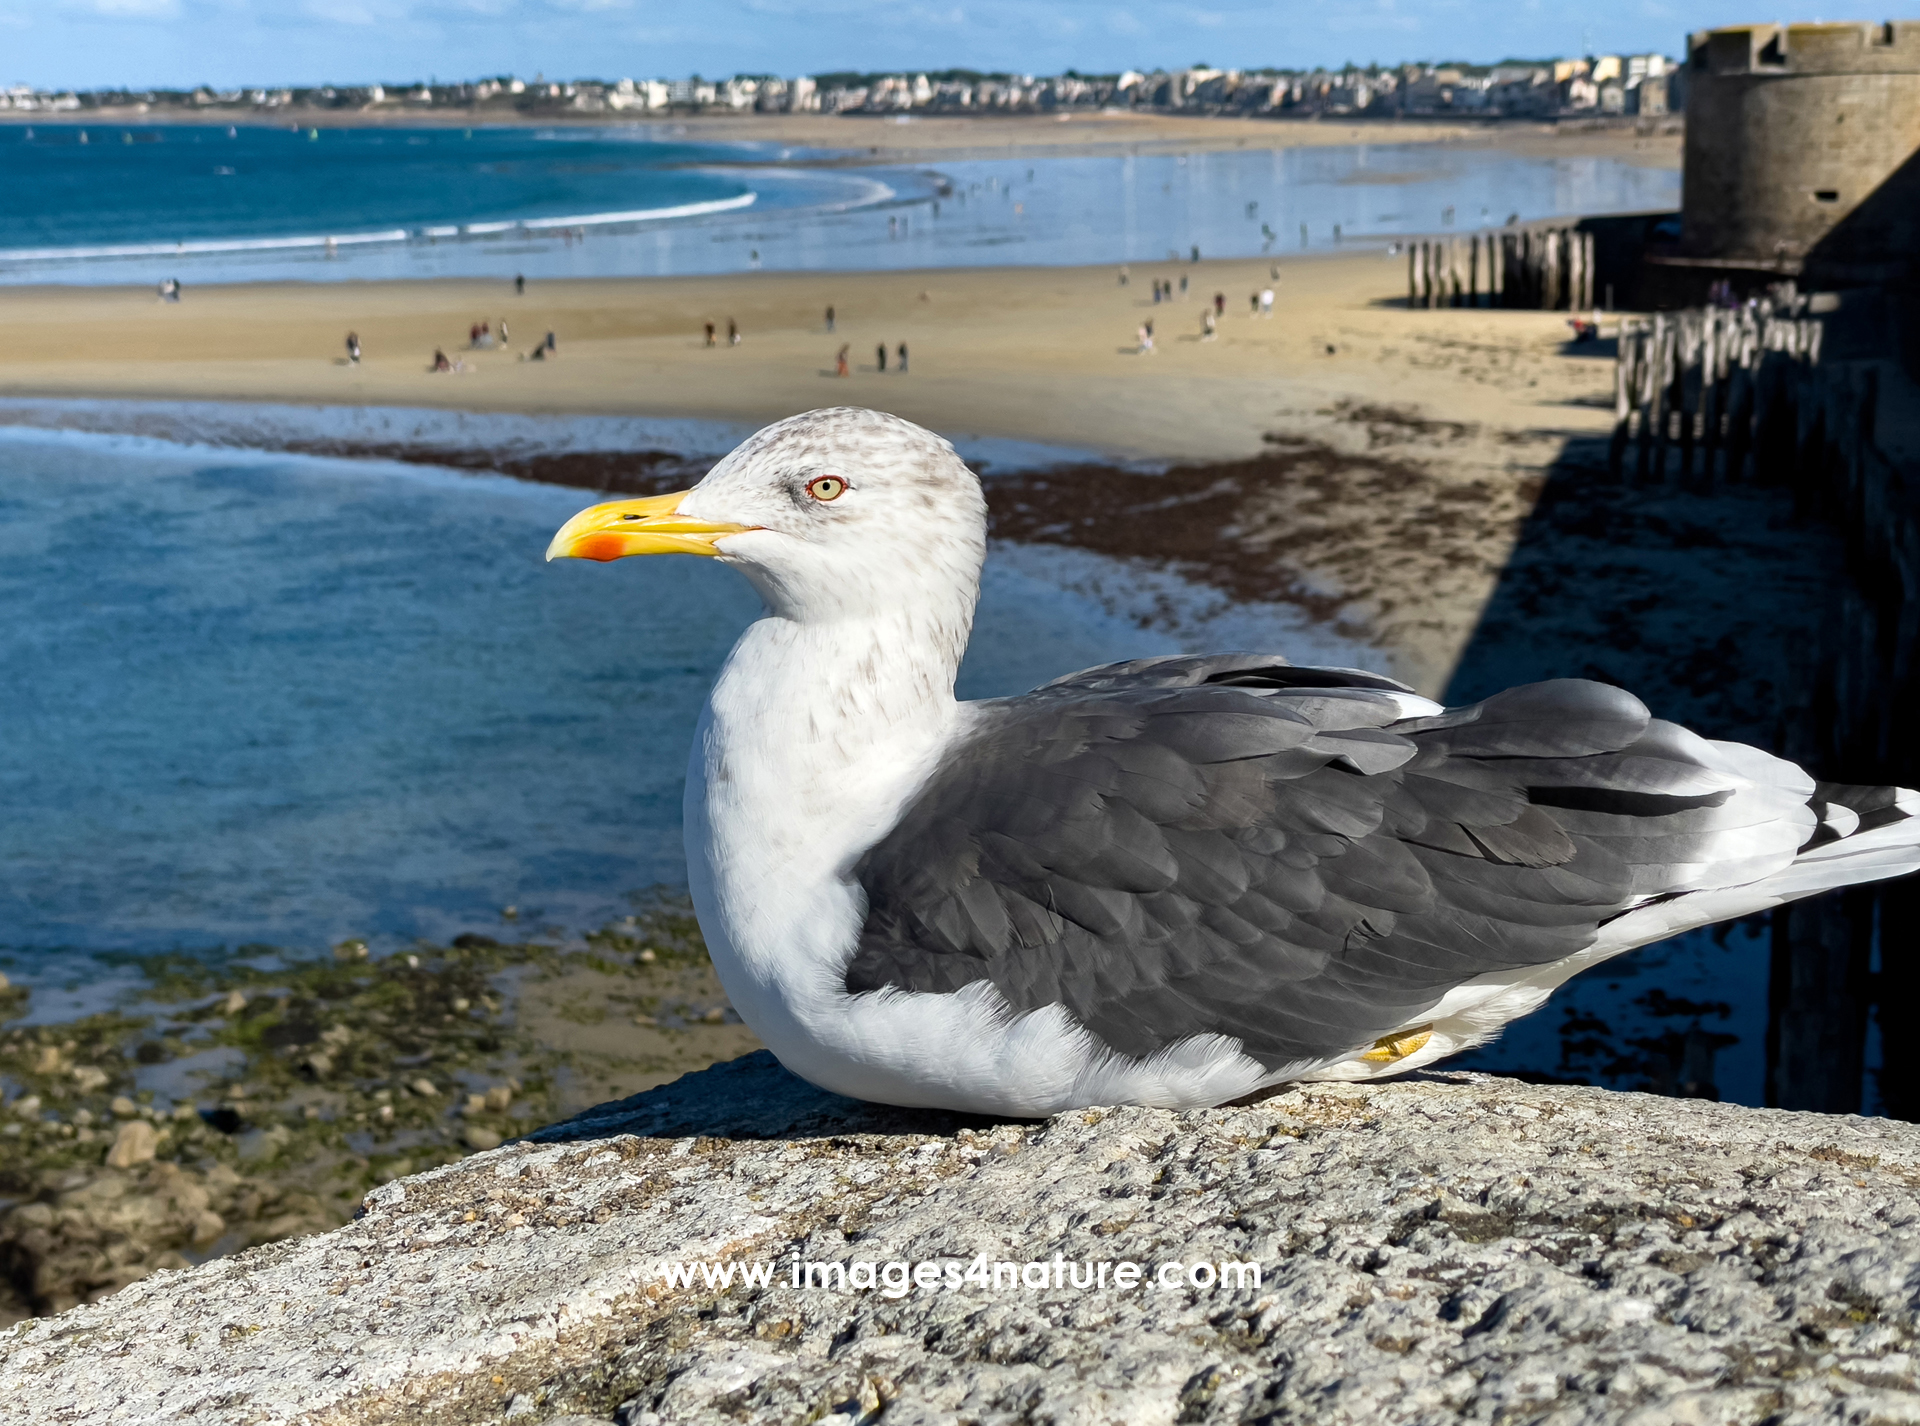 Walking around the high city walls of Saint Malo, I spotted this seagull taking a rest in the afternoon sun  Fortunately, I quickly took a portrait snapshot with my iPhone, before another tourist chased her away   France, Saint Malo, October 2022   Image ID 202210 FR 13